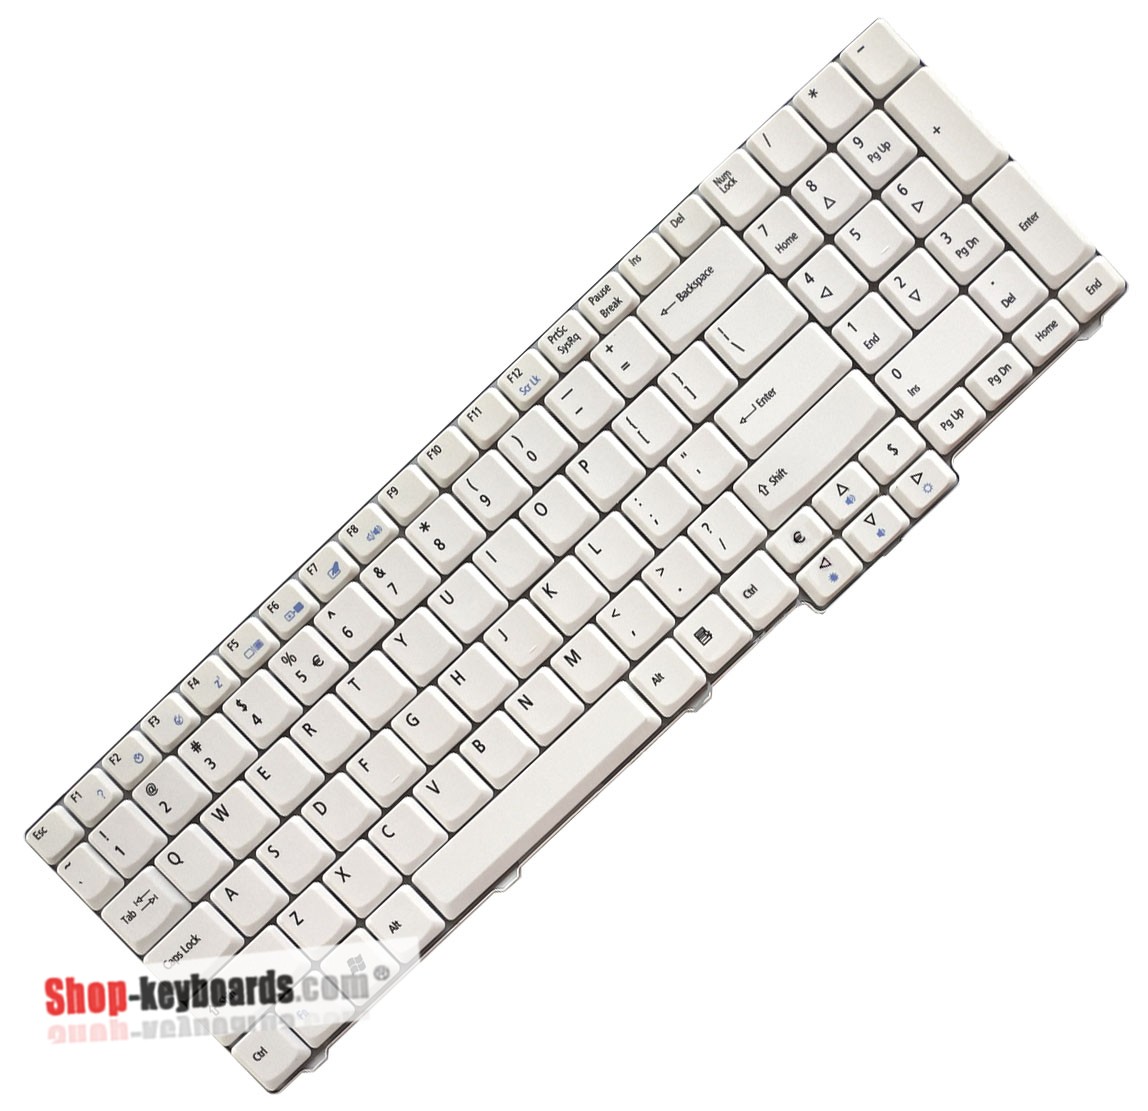 Acer Aspire 8930G-734G32Bn Keyboard replacement